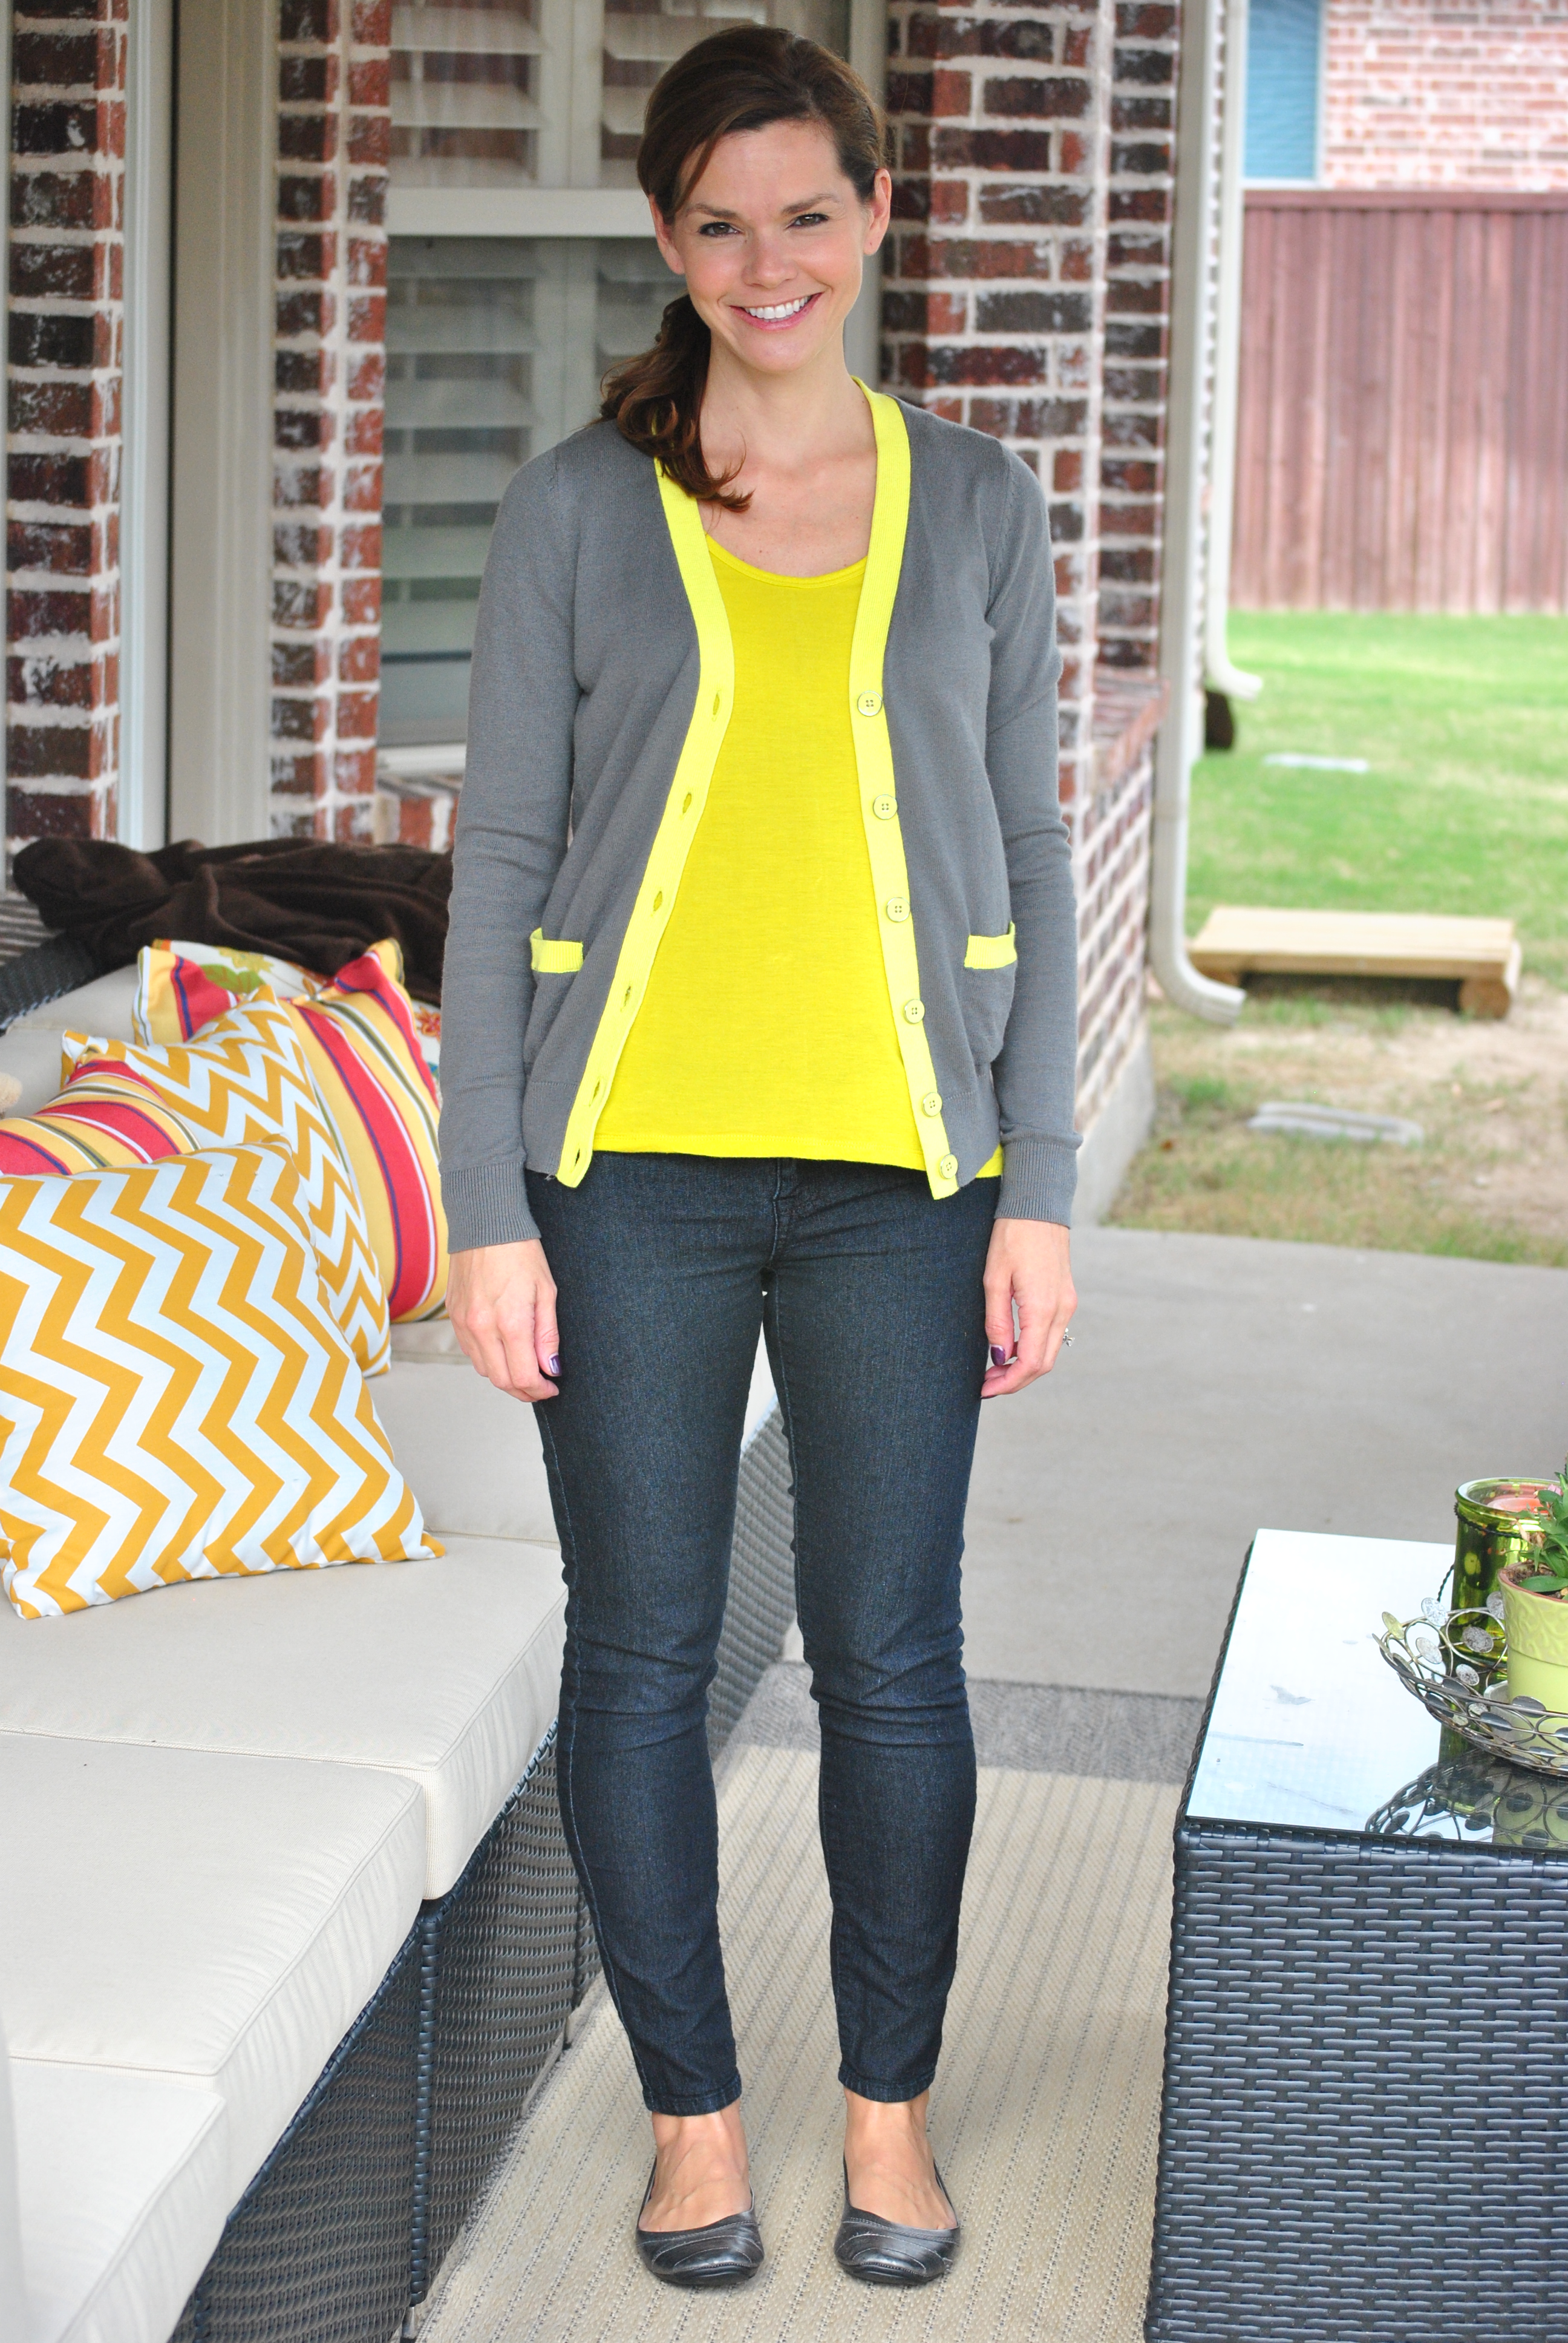 Yellow Trimmed Grey Cardigan | Get Your Pretty On